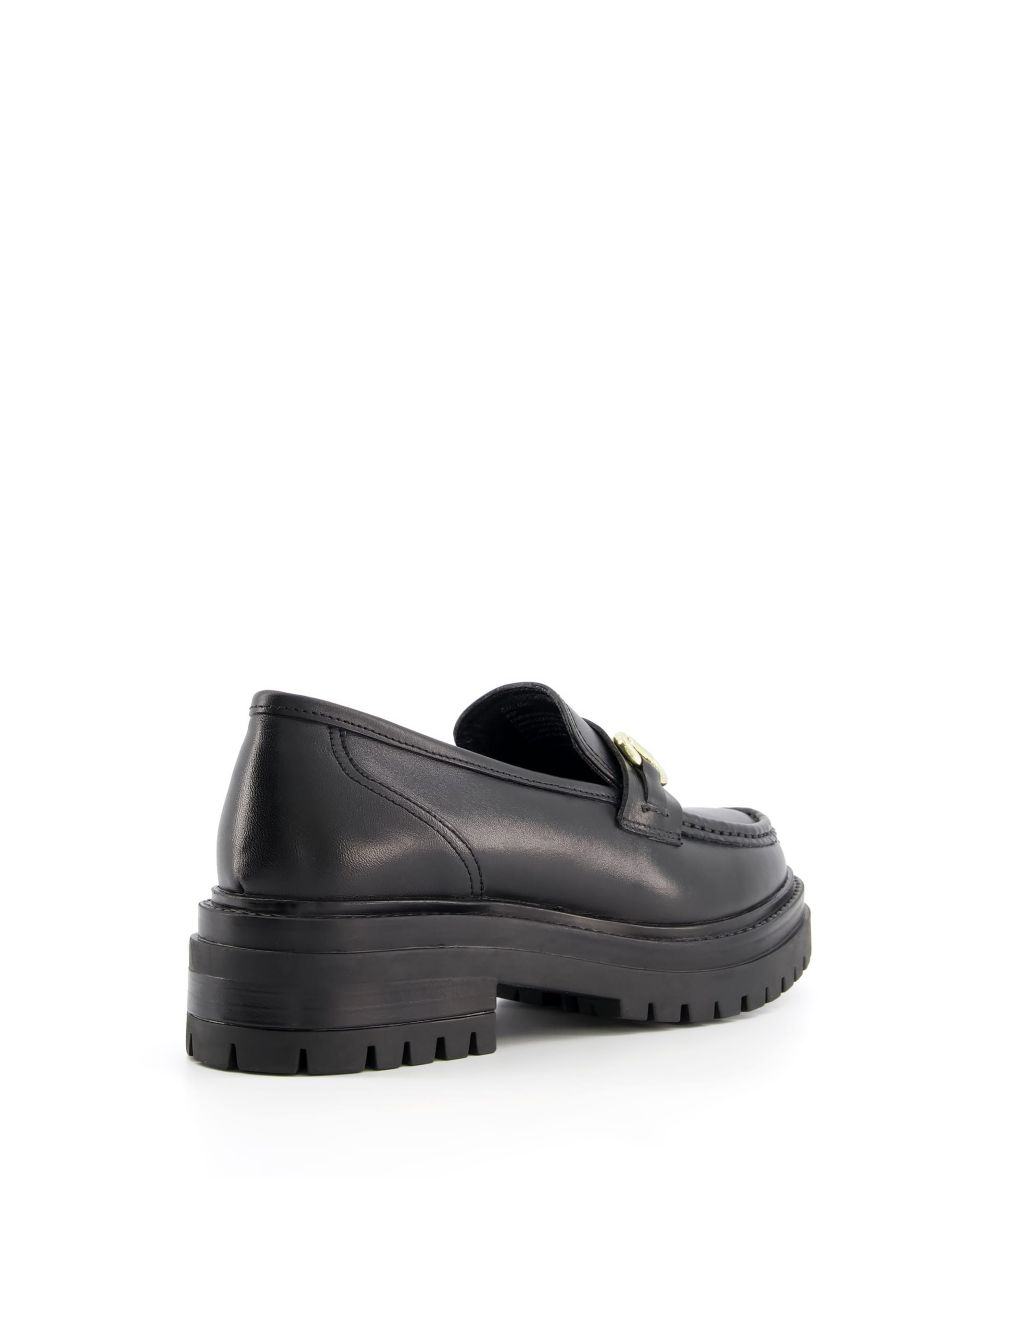 Leather Chunky Bar Flat Loafers image 4